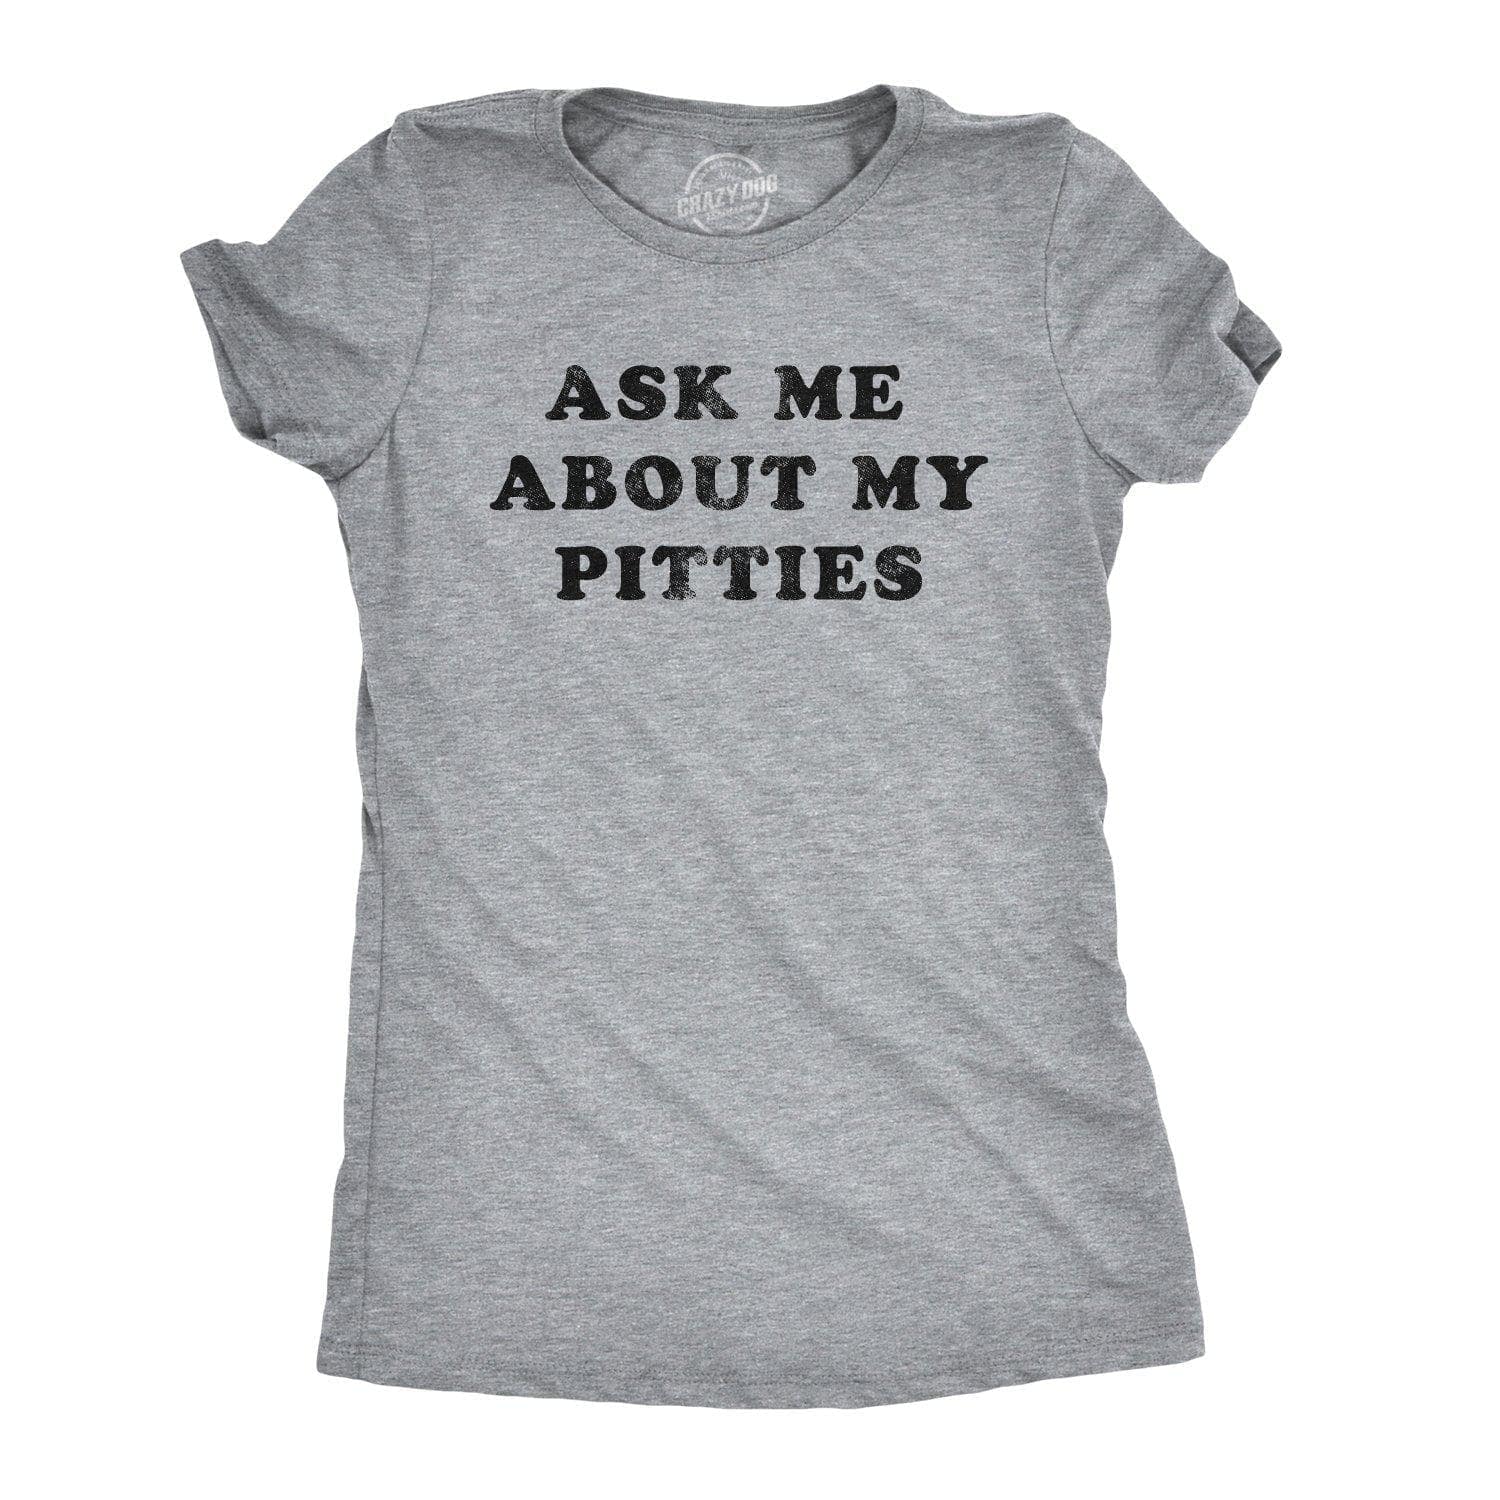 Ask Me About My Pitties Women's Tshirt  -  Crazy Dog T-Shirts